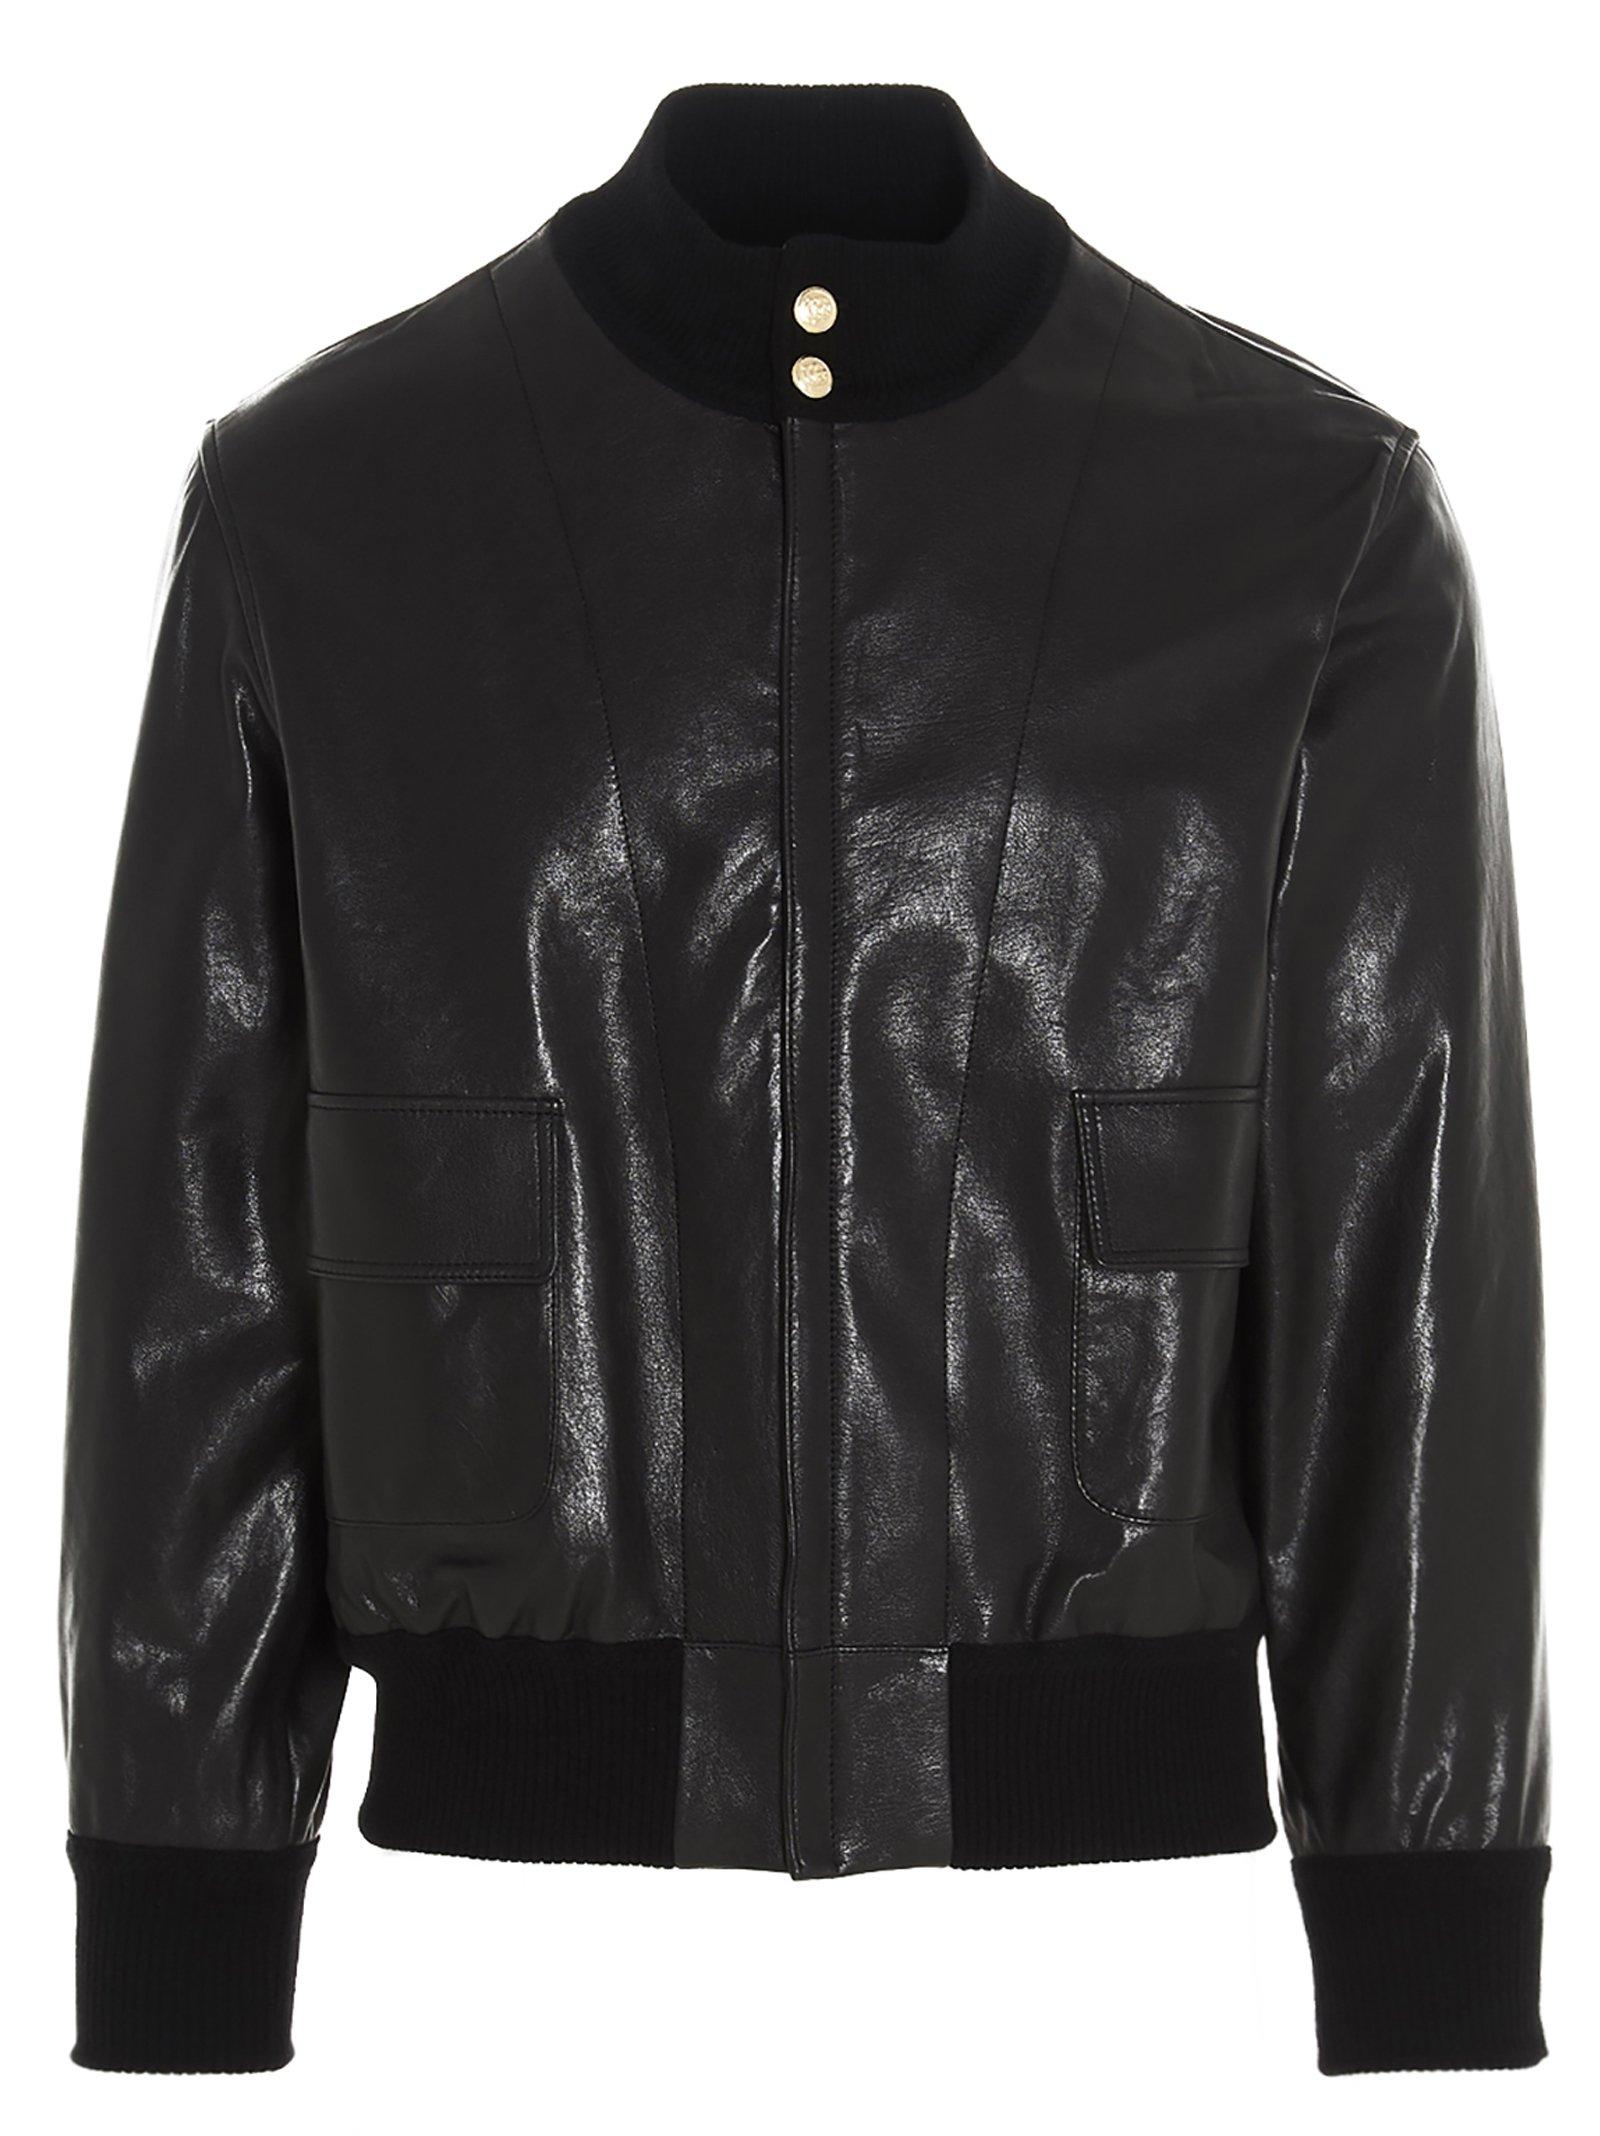 Gucci Leather Bomber Jacket in Black for Men - Save 43% - Lyst